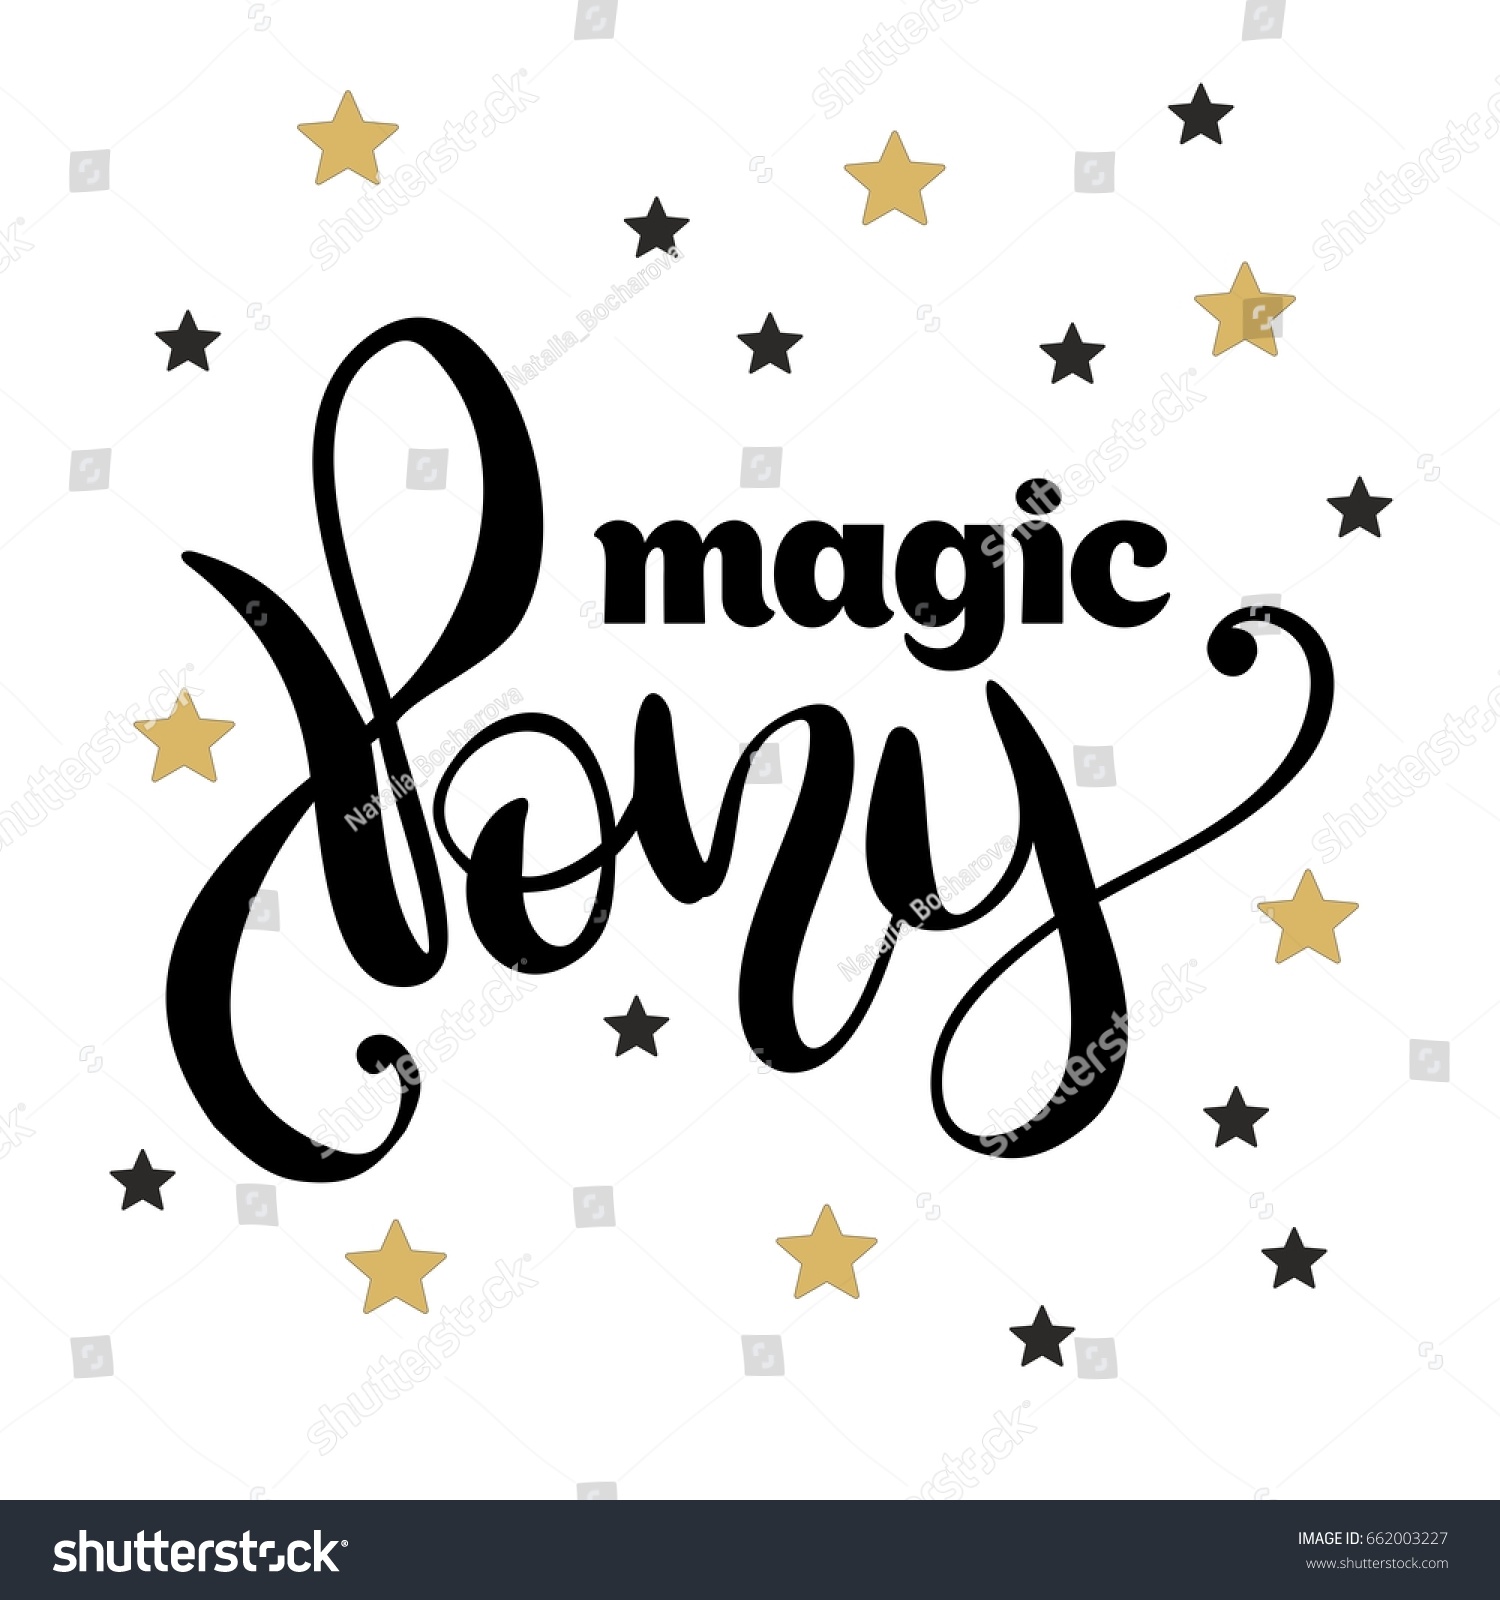 SVG of The inscription pony in the background with the stars. svg